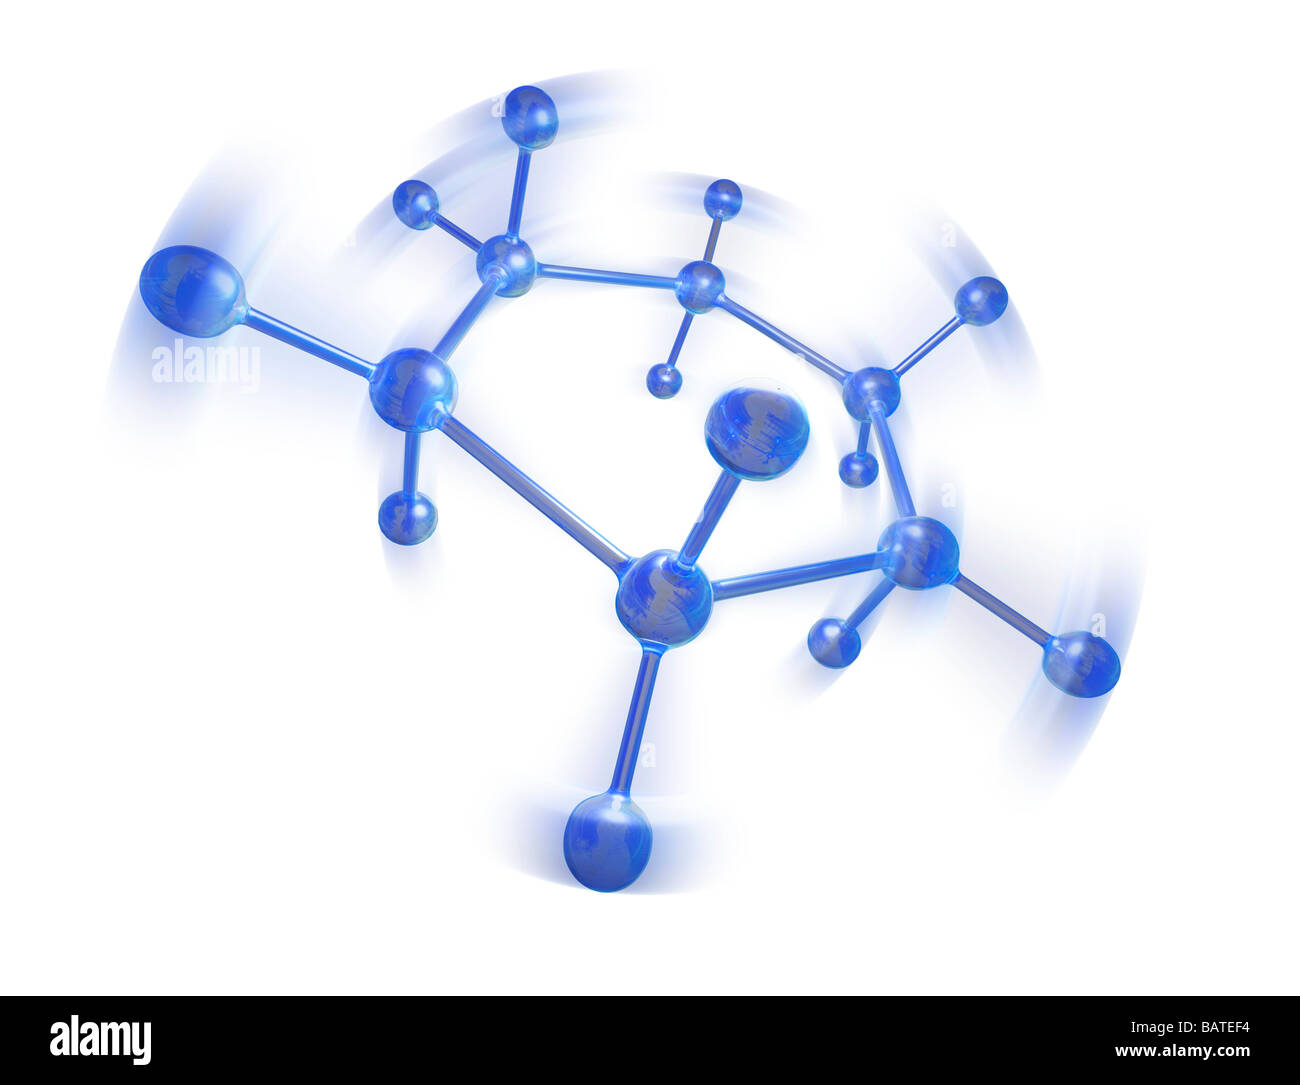 Molecular vibration, conceptual computer artwork.Atoms are shown as spheres and the bonds betweenthem as rods. Stock Photo